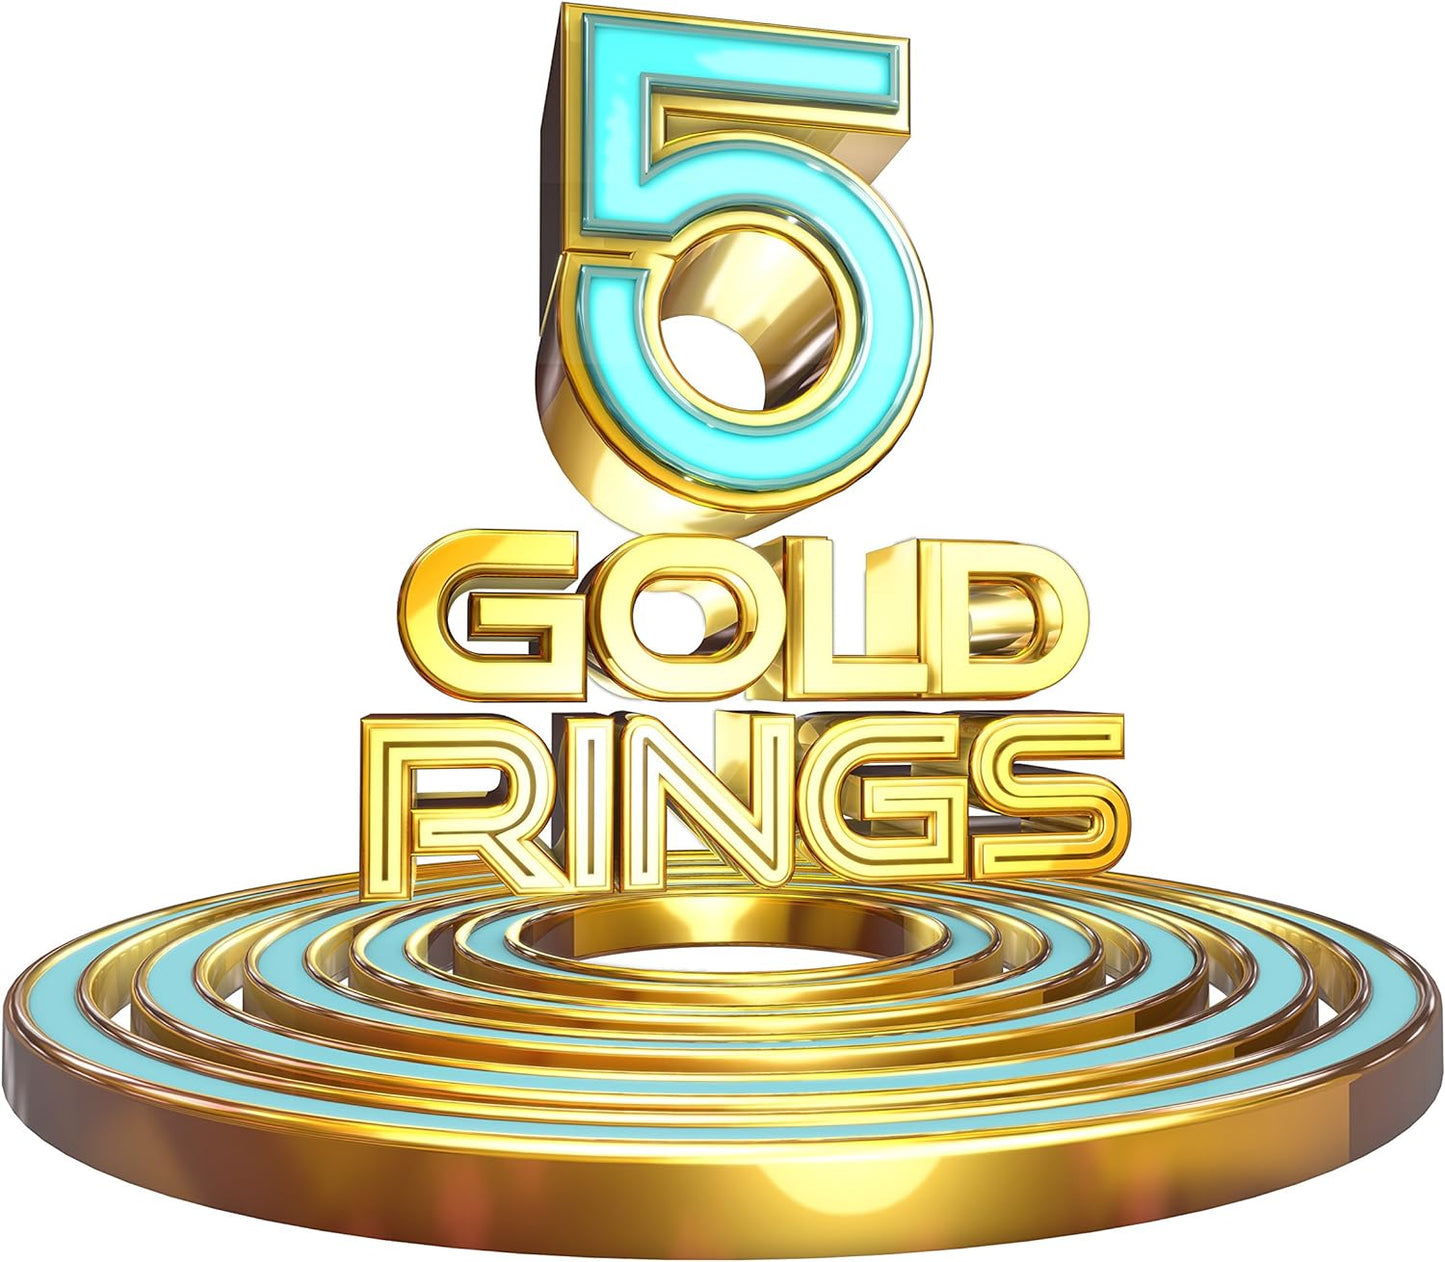 Five Gold Rings Board Game from Ideal